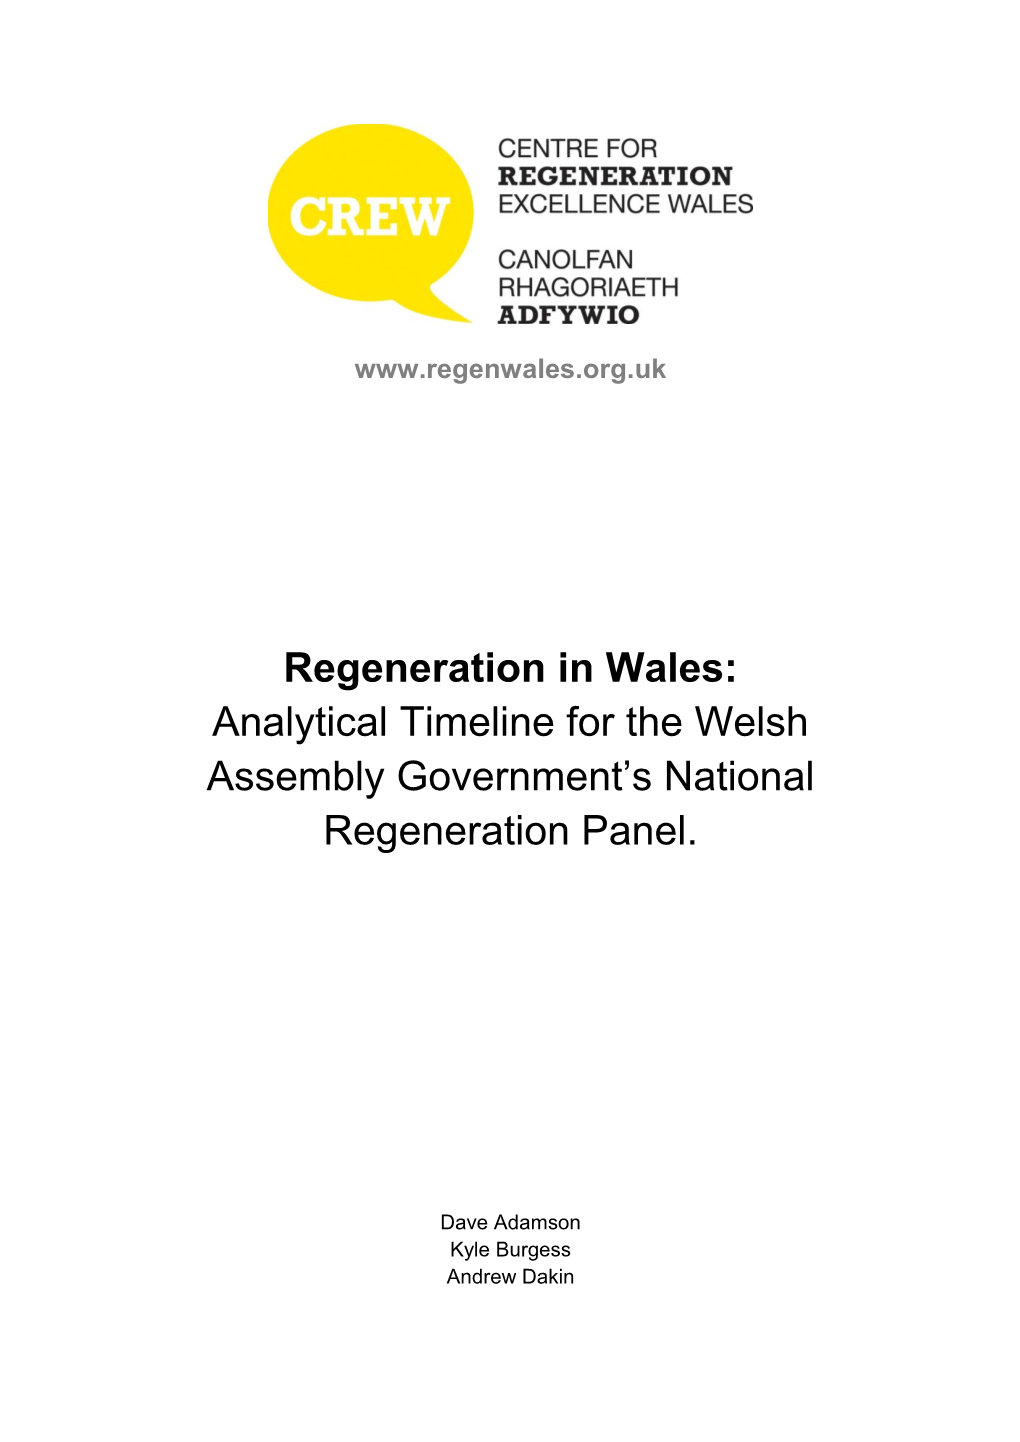 Regeneration in Wales: Analytical Timeline for the Welsh Assembly Government‟S National Regeneration Panel